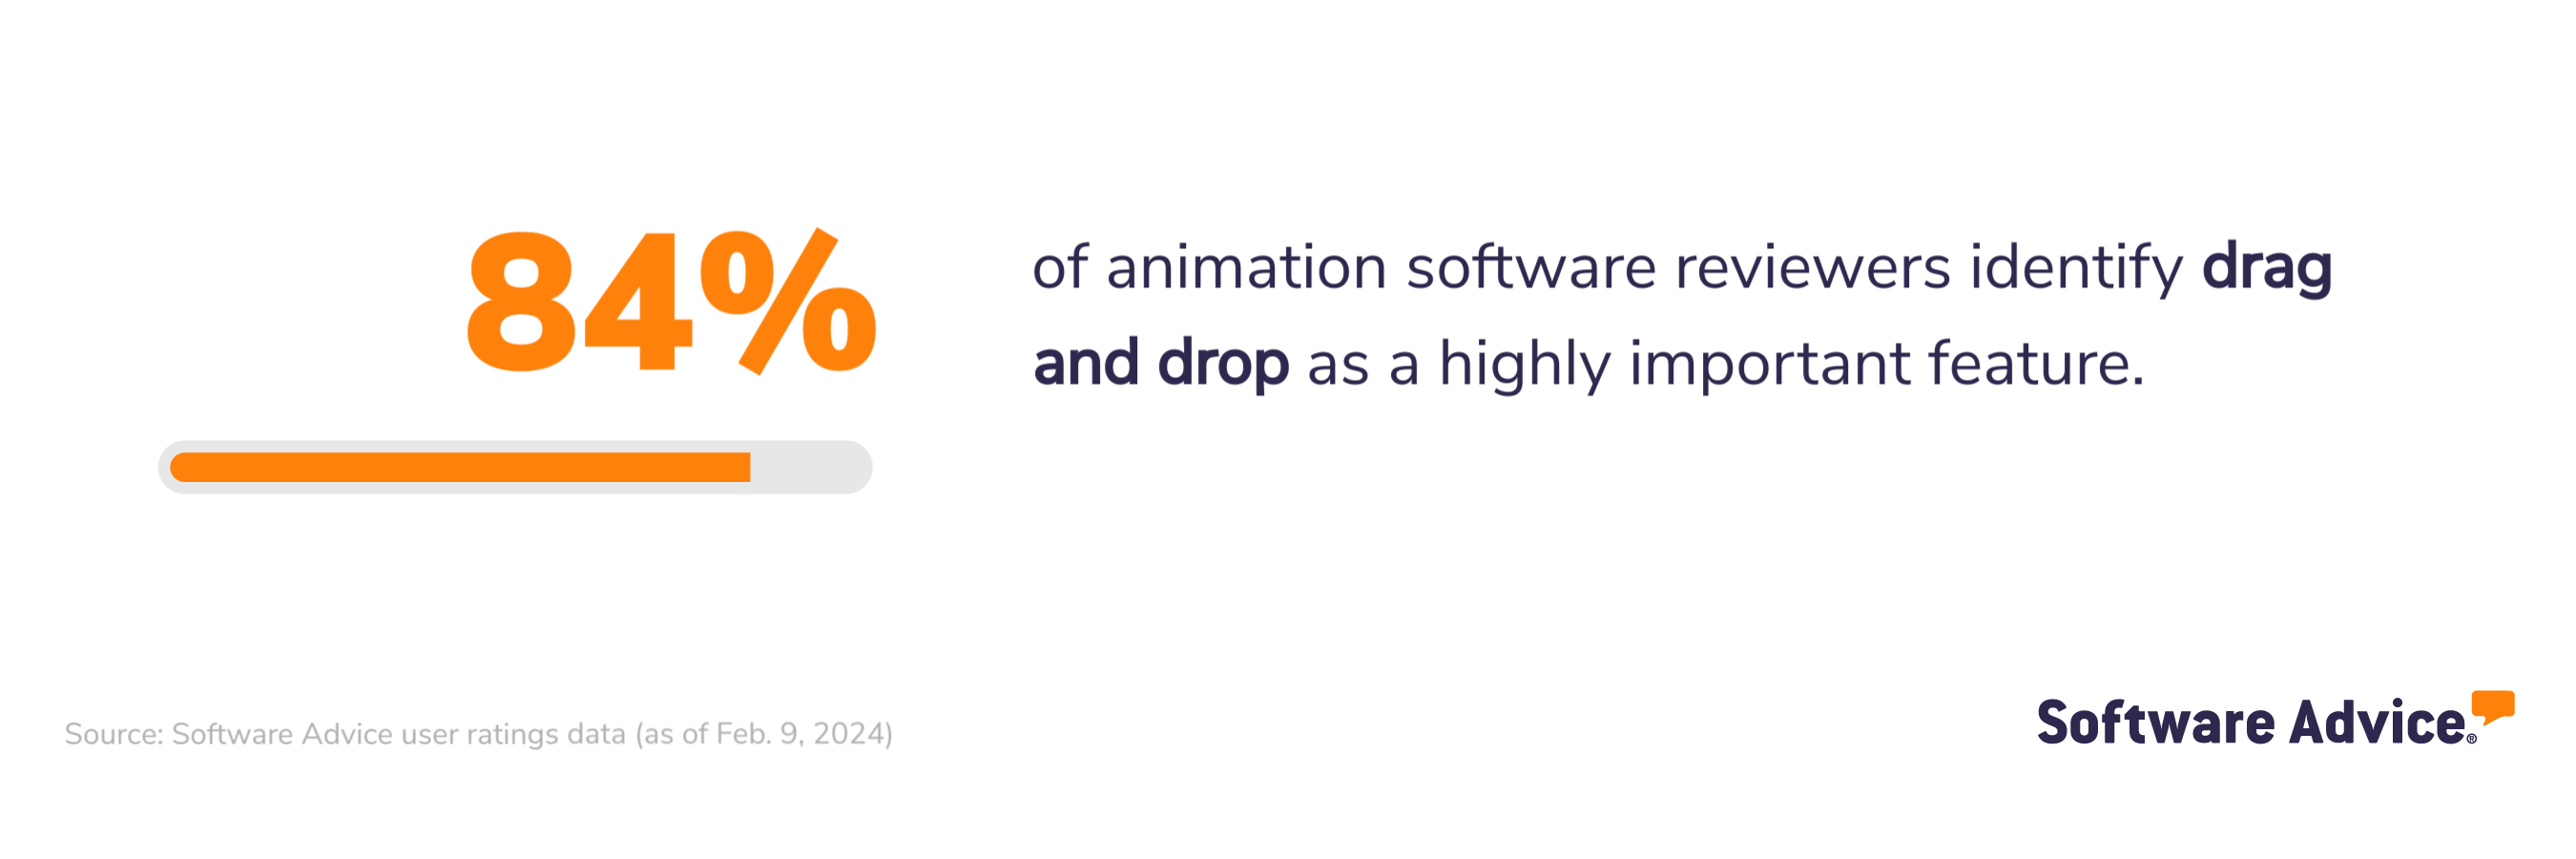 84% of animation software reviewers identify drag and drop as a highly important feature